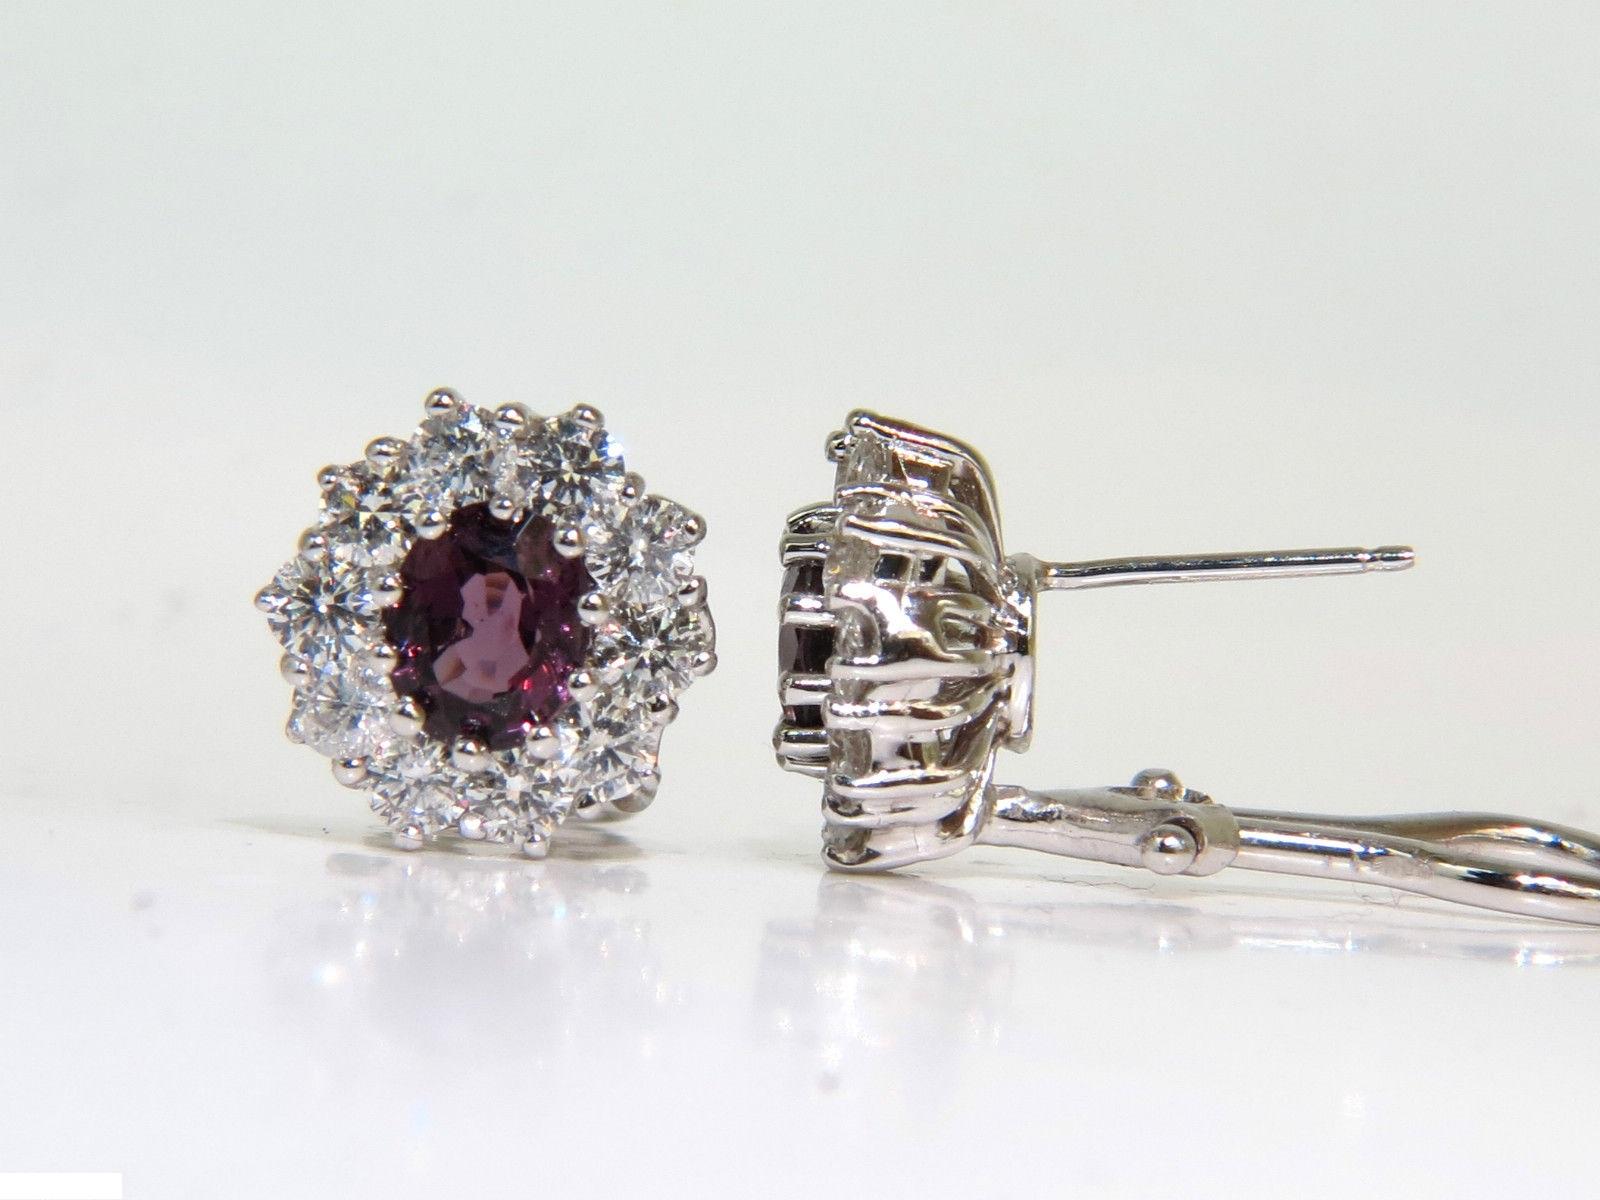 14 Karat 3.36 Carat Natural Purple Spinel Diamond Cluster Earrings and Omega For Sale 3